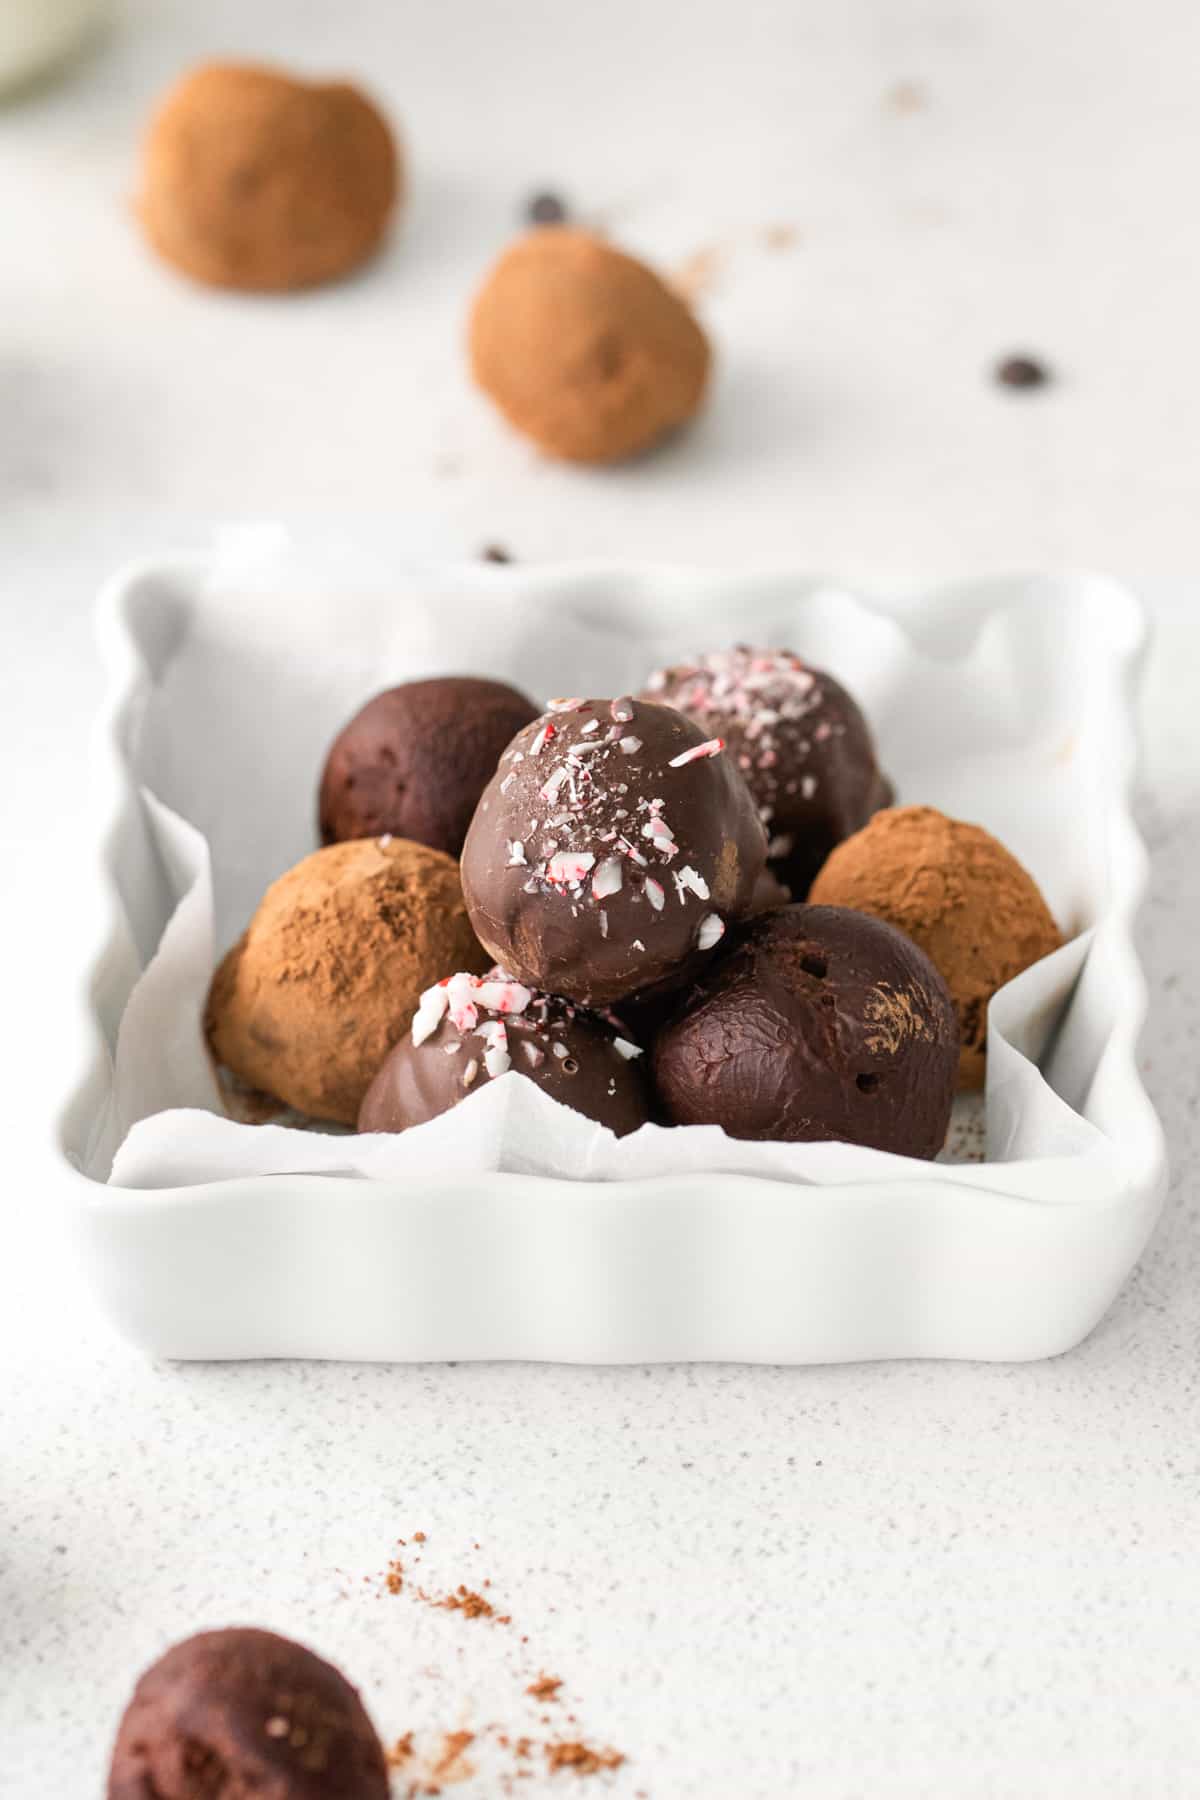 dark chocolate truffles in serving plate, some rolled in cocoa powder, some plain, and some coated in chocolate topped with crushed peppermint candy